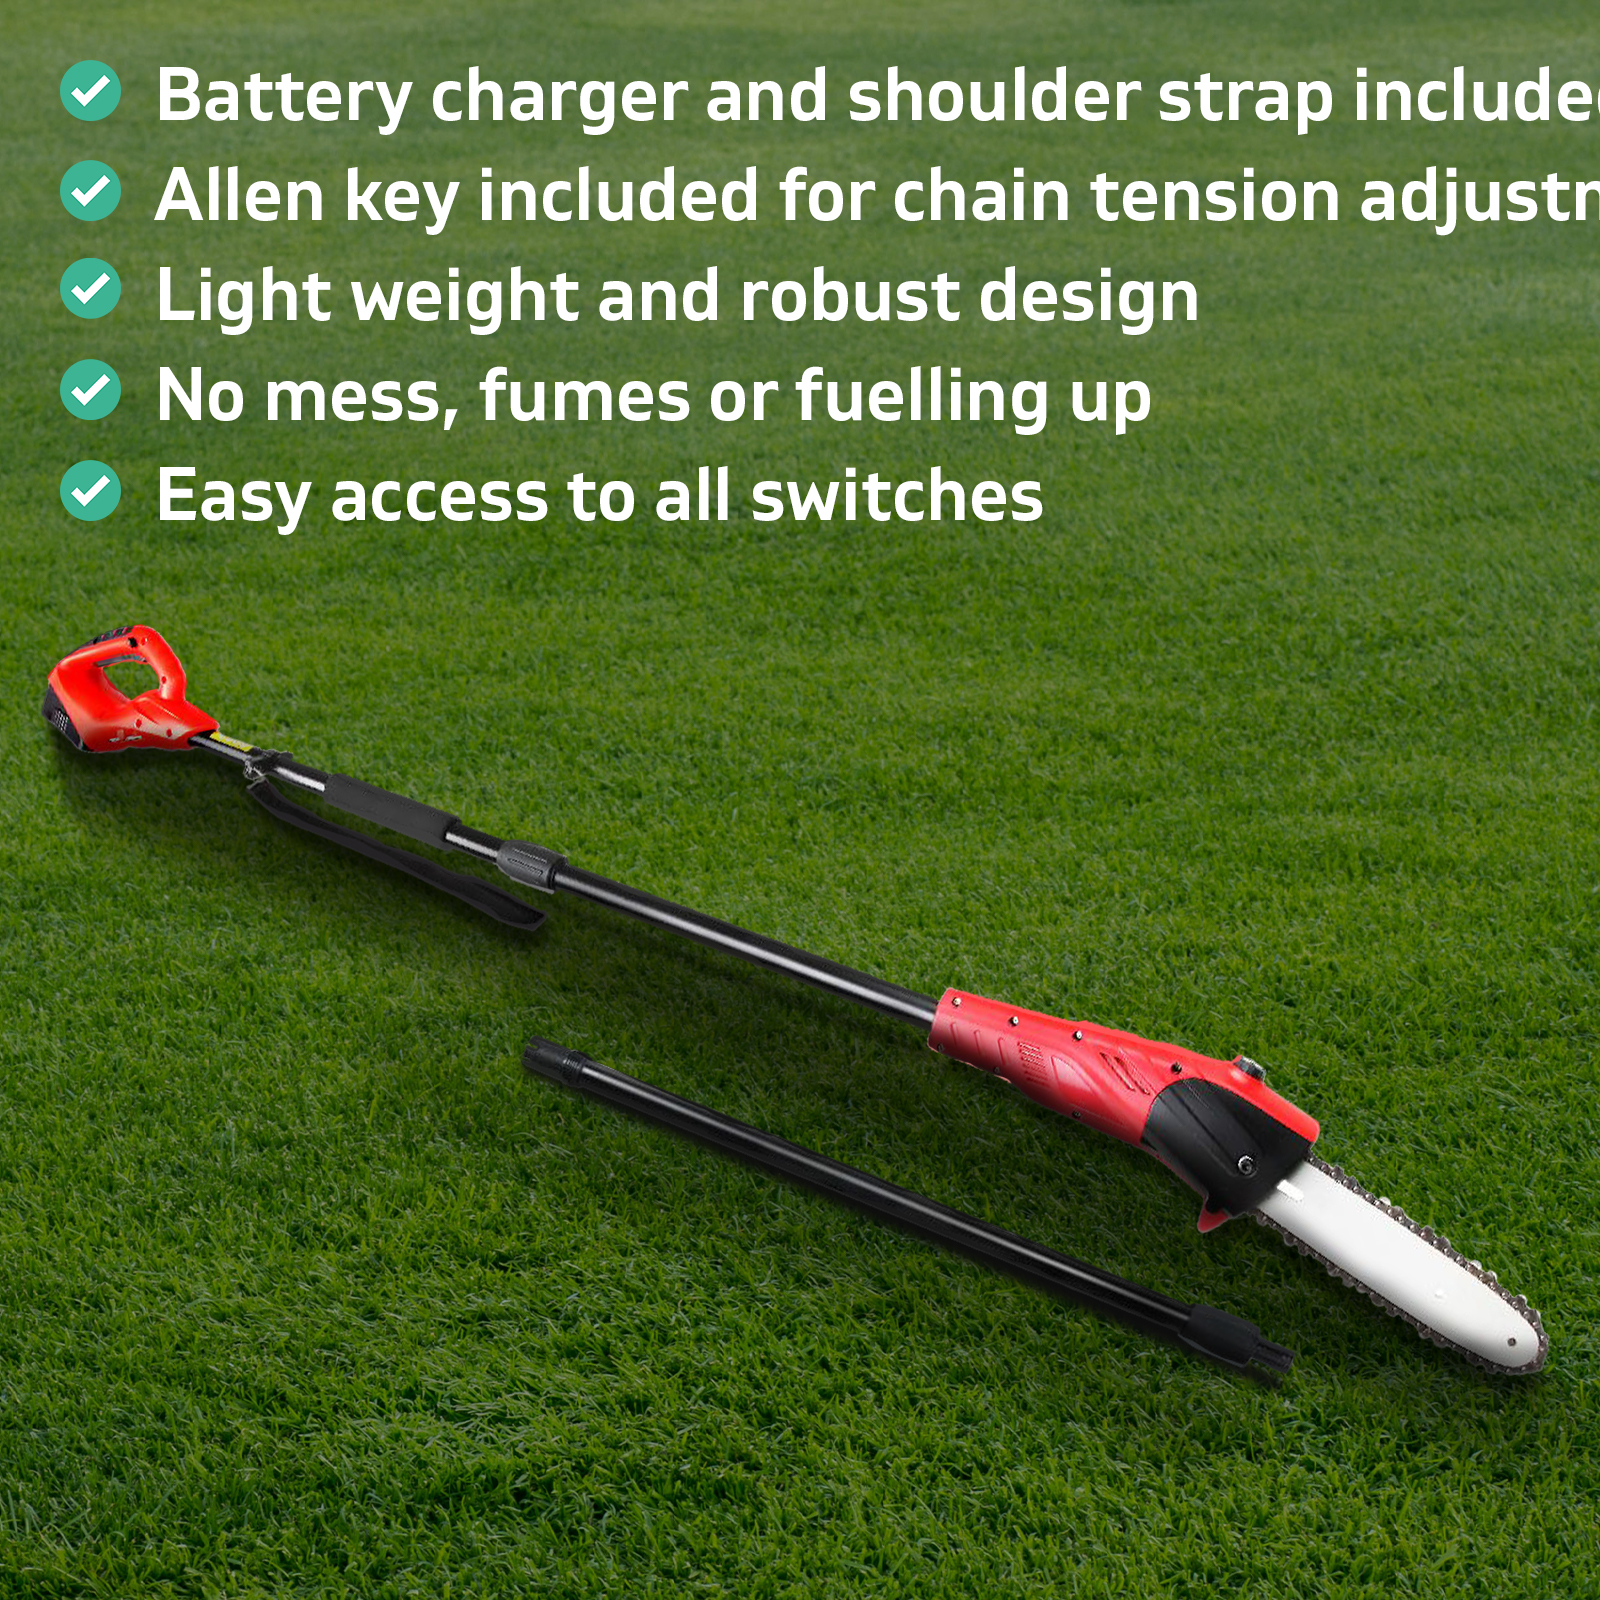 20V 1500mAh Lithium Cordless Electric Chainsaw Compact 8”bar and chain